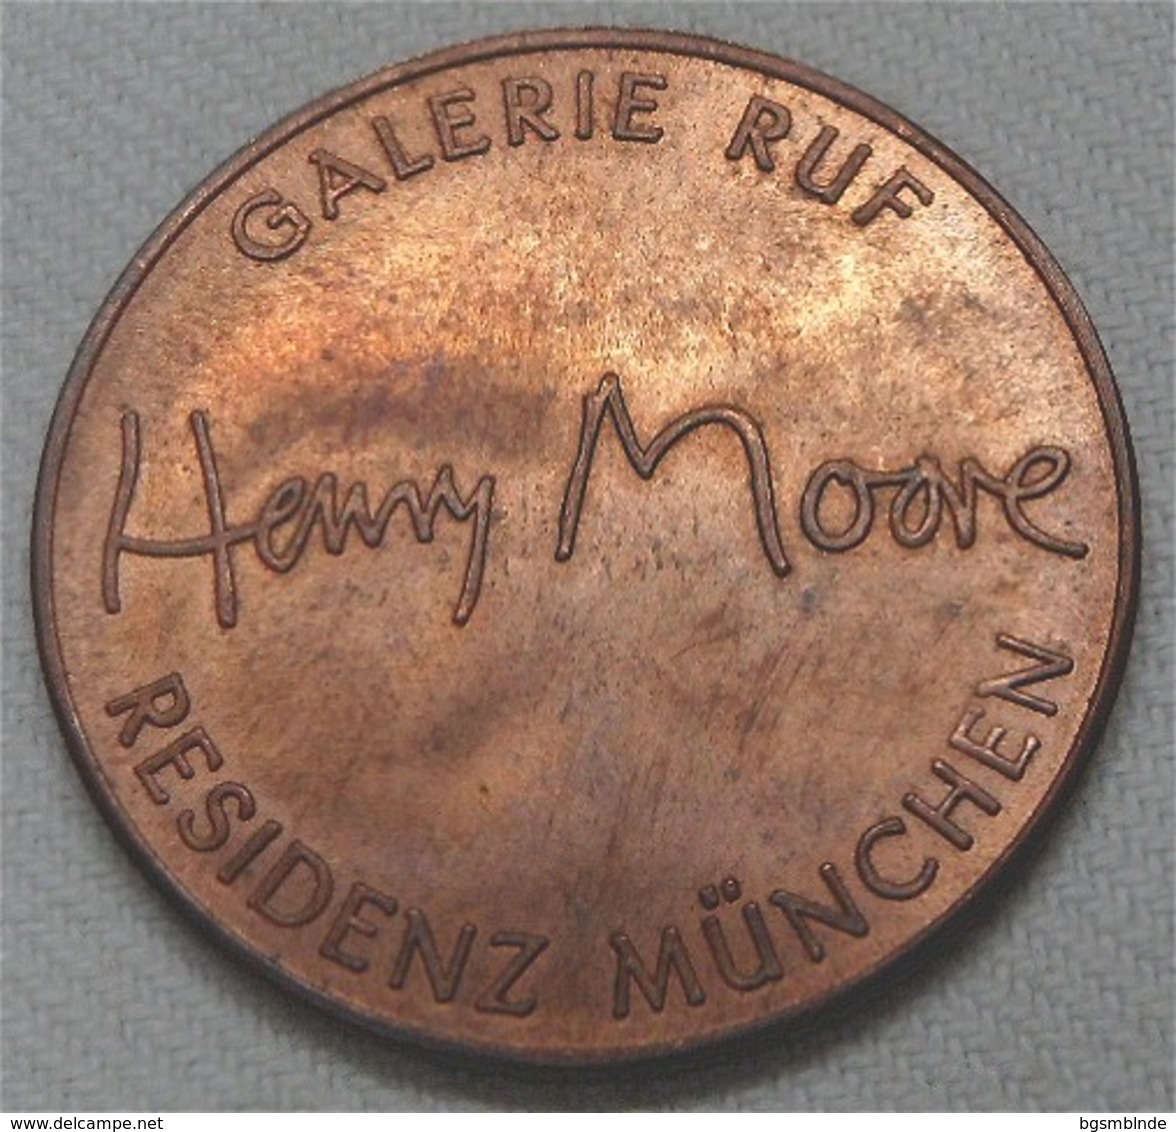 Medaille "Henry Moore" Galerie Ruf München - Elongated Coins